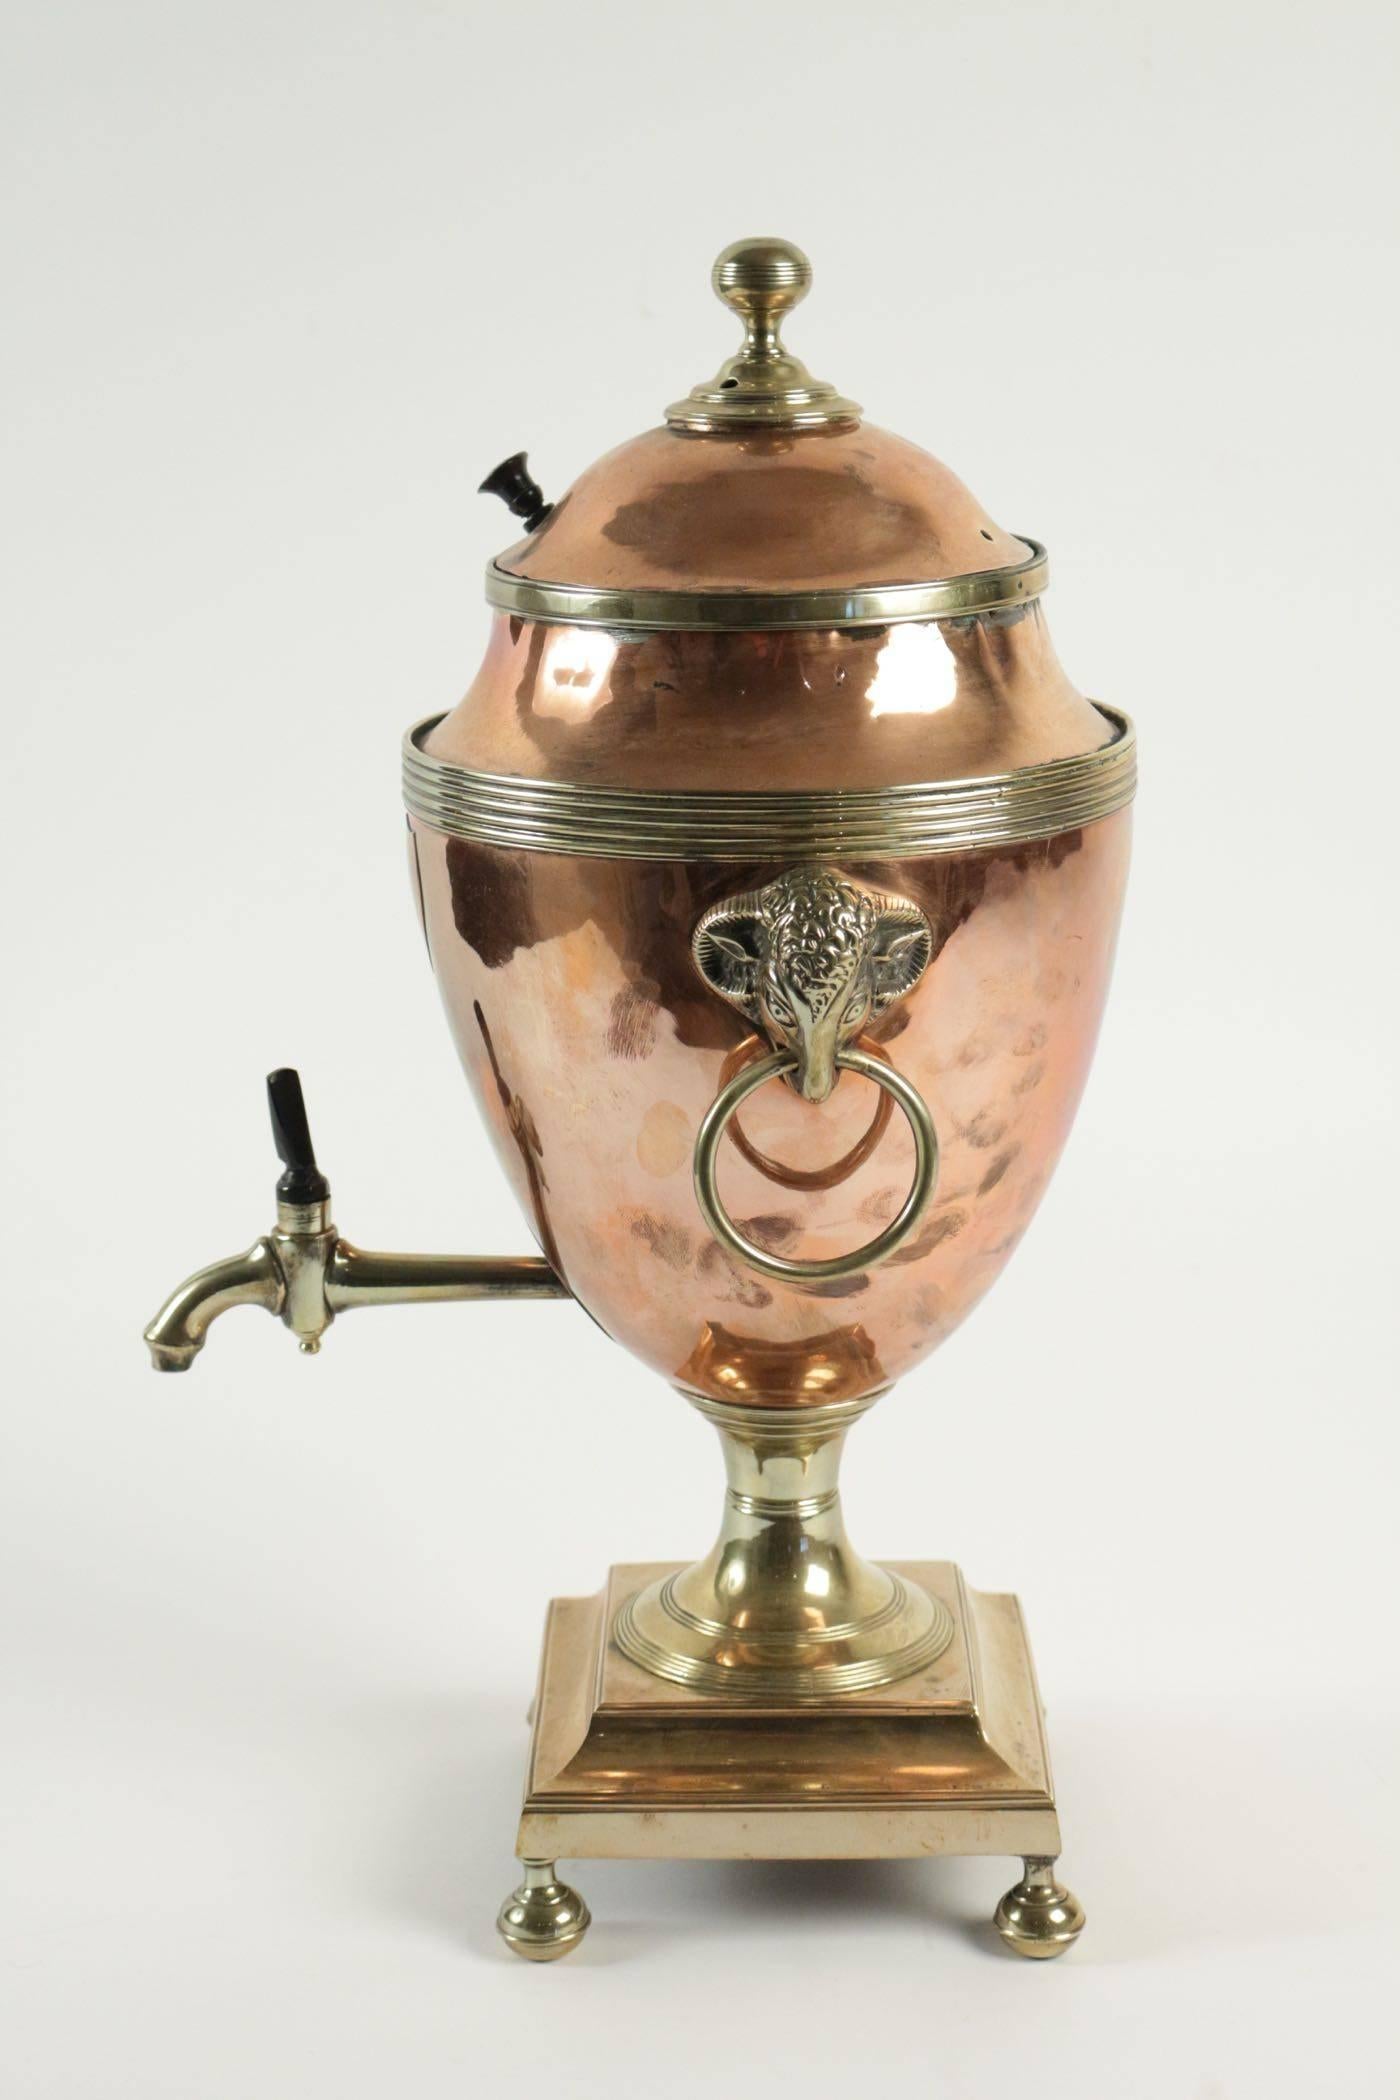 English water warmer and dispenser in copper and brass, Directoire period.
Measures: H 47cm, L 24cm, P 22cm.
 